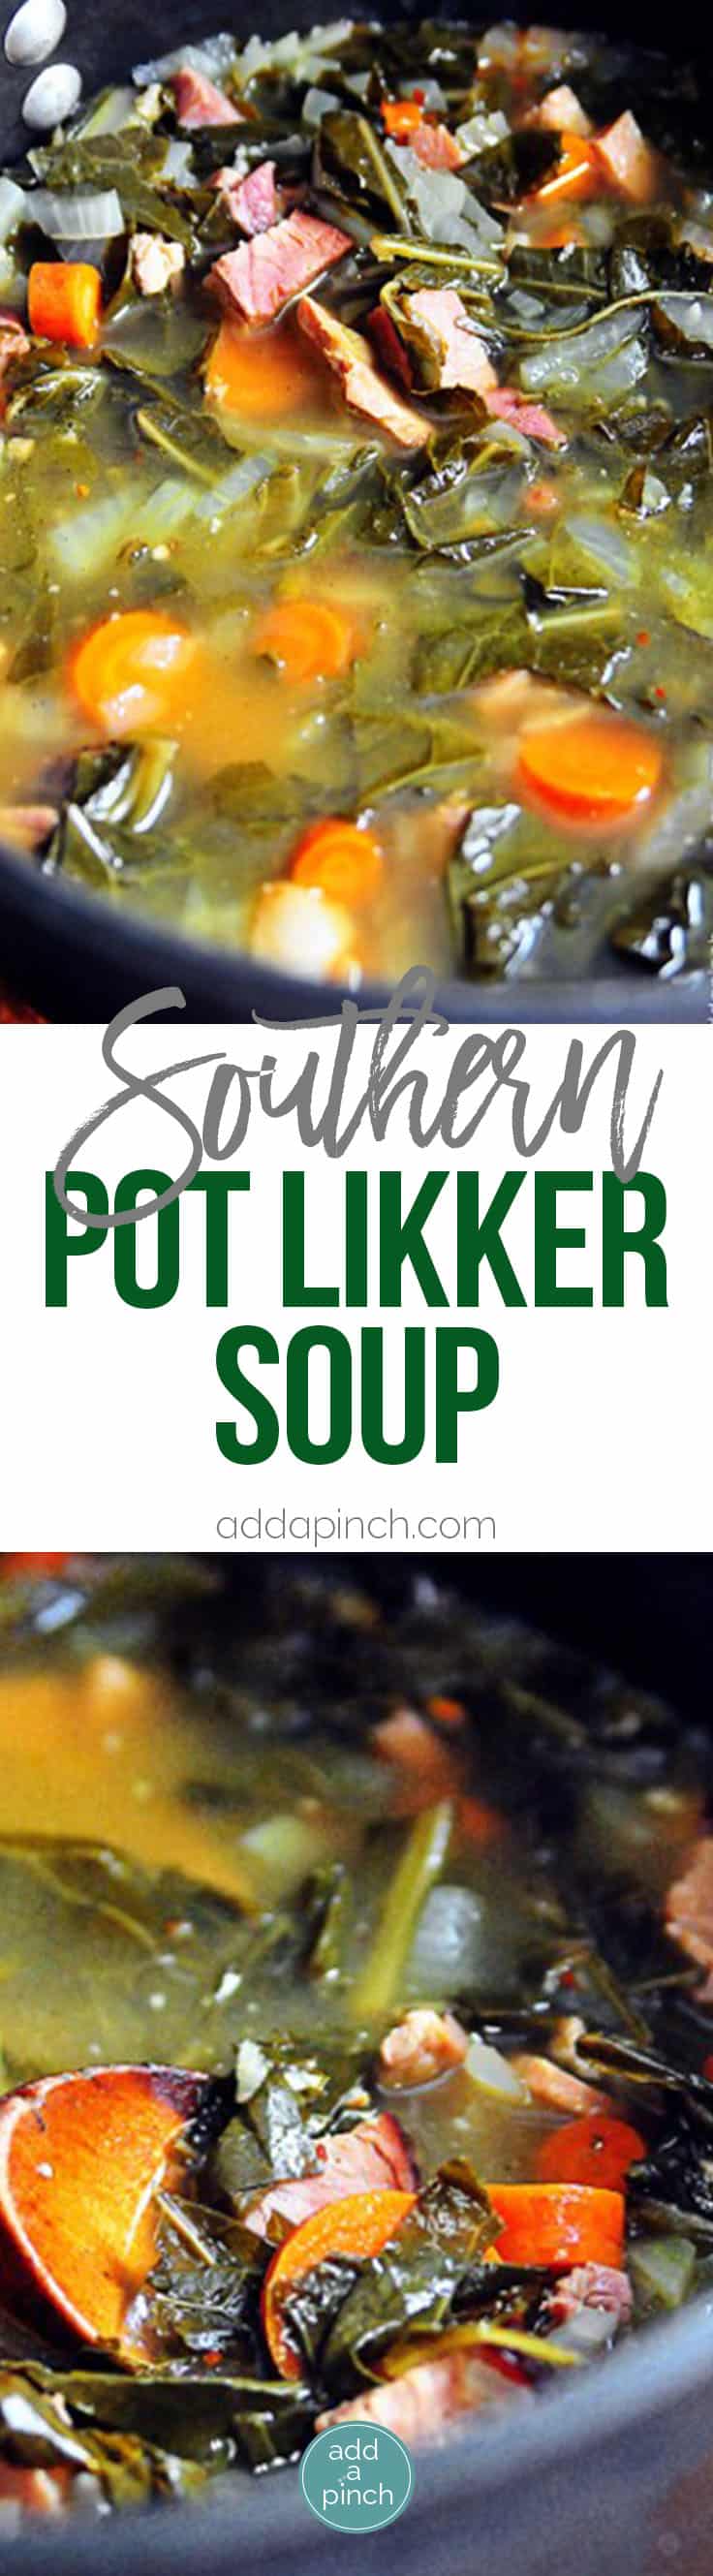 Southern Pot Likker Soup Recipe - A quick, easy, and comforting soup recipe made of ham, carrots, and greens. // addapinch.com